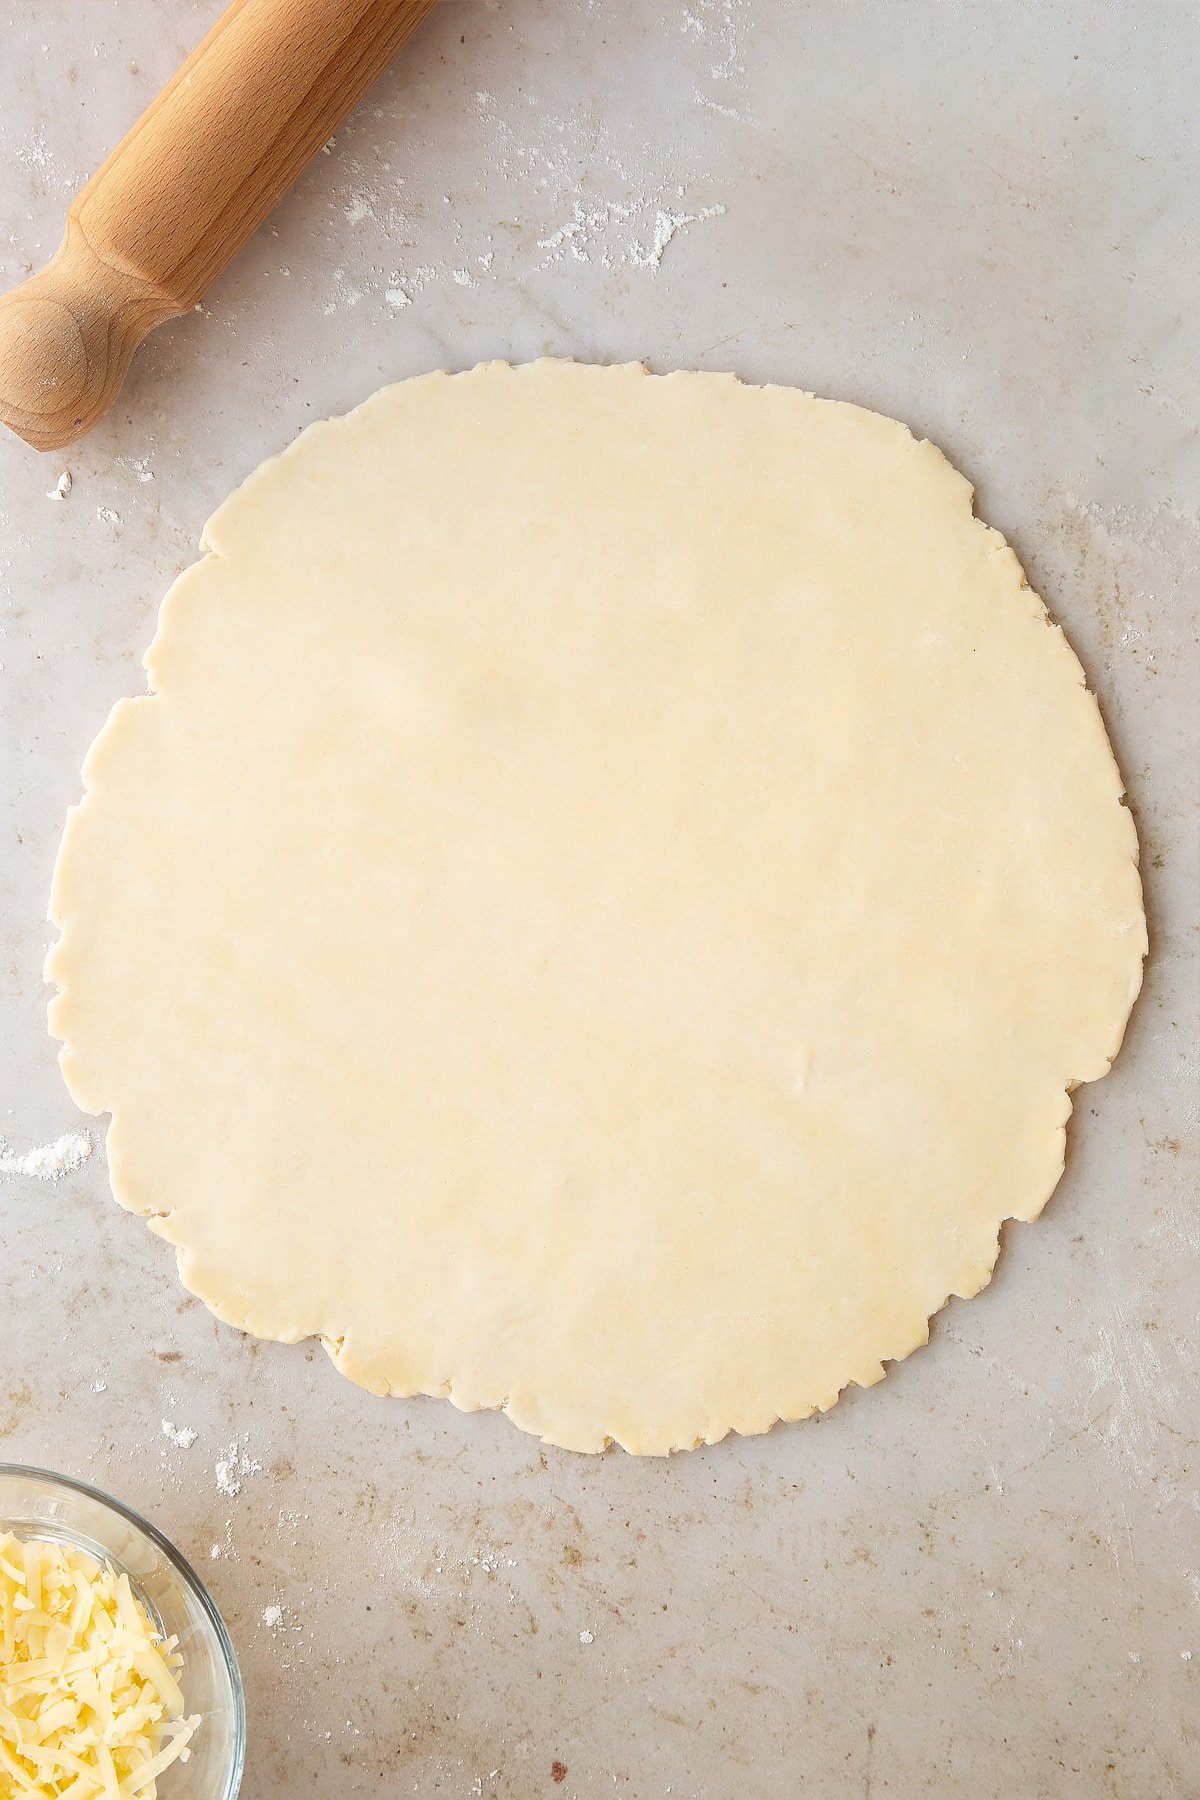 shortcrust pastry rolled out onto a floured surface.